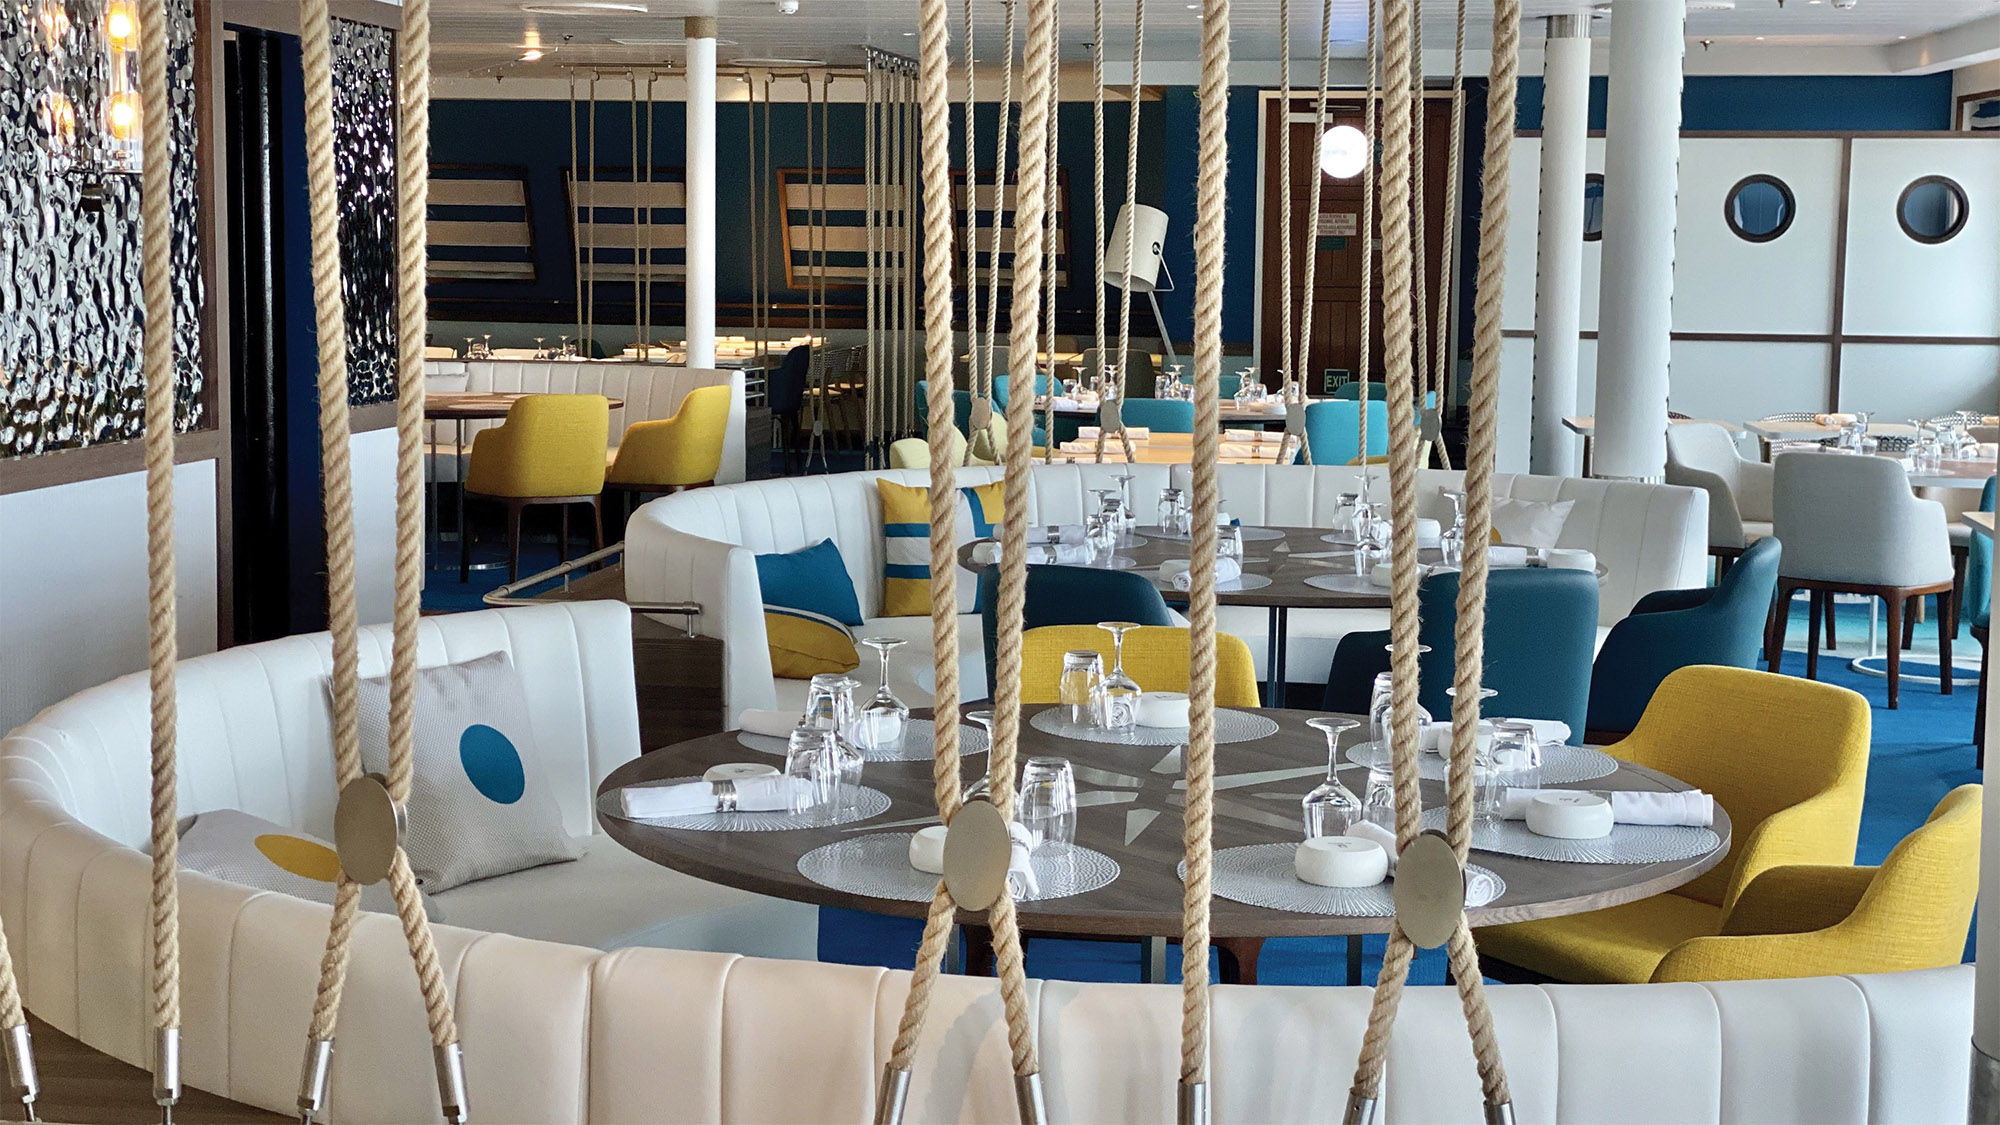 The Club Med 2's Monte Carlo restaurant weaves a chic design with nautical elements, such as ropes and wall accents resembling ocean waves.